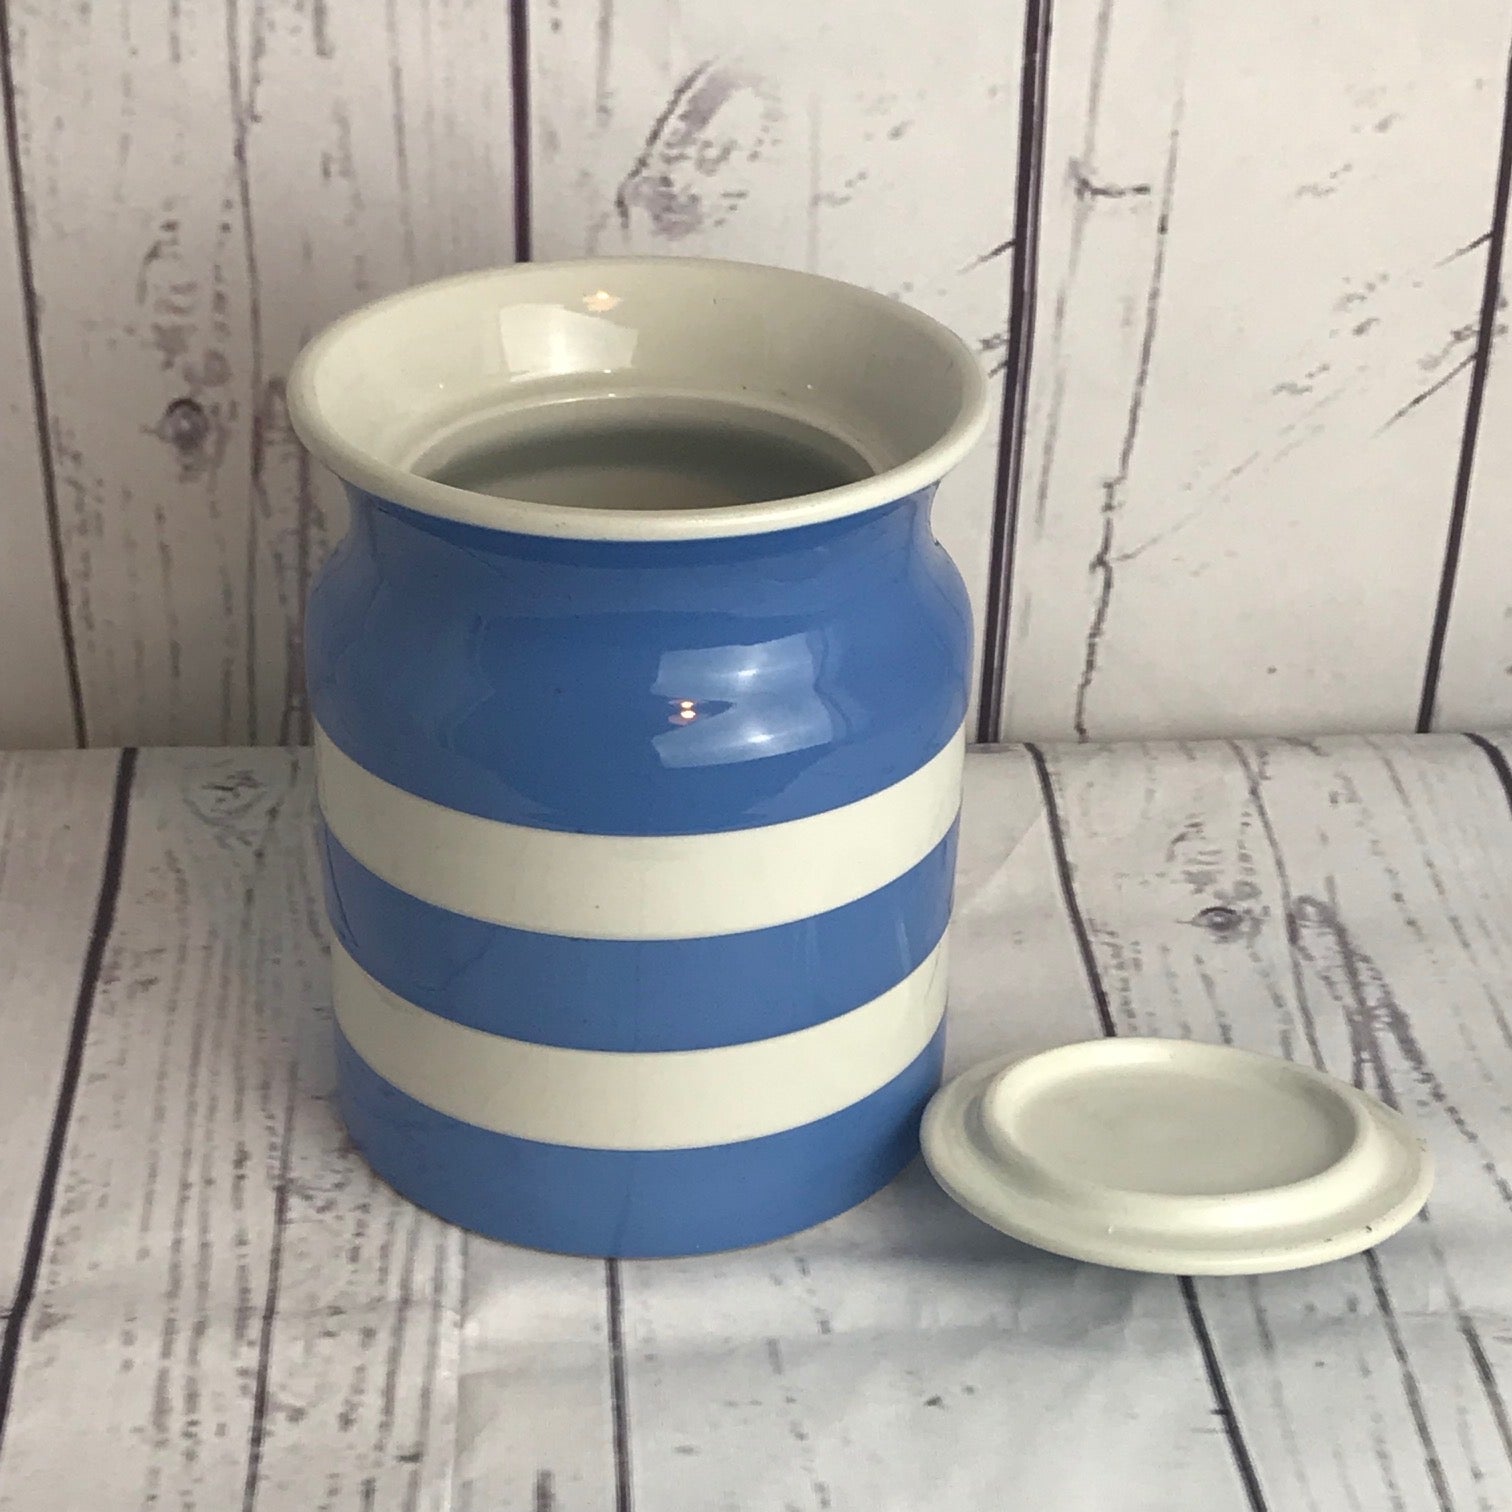 T.G. Green blue and white Cornishware storage jar with lid